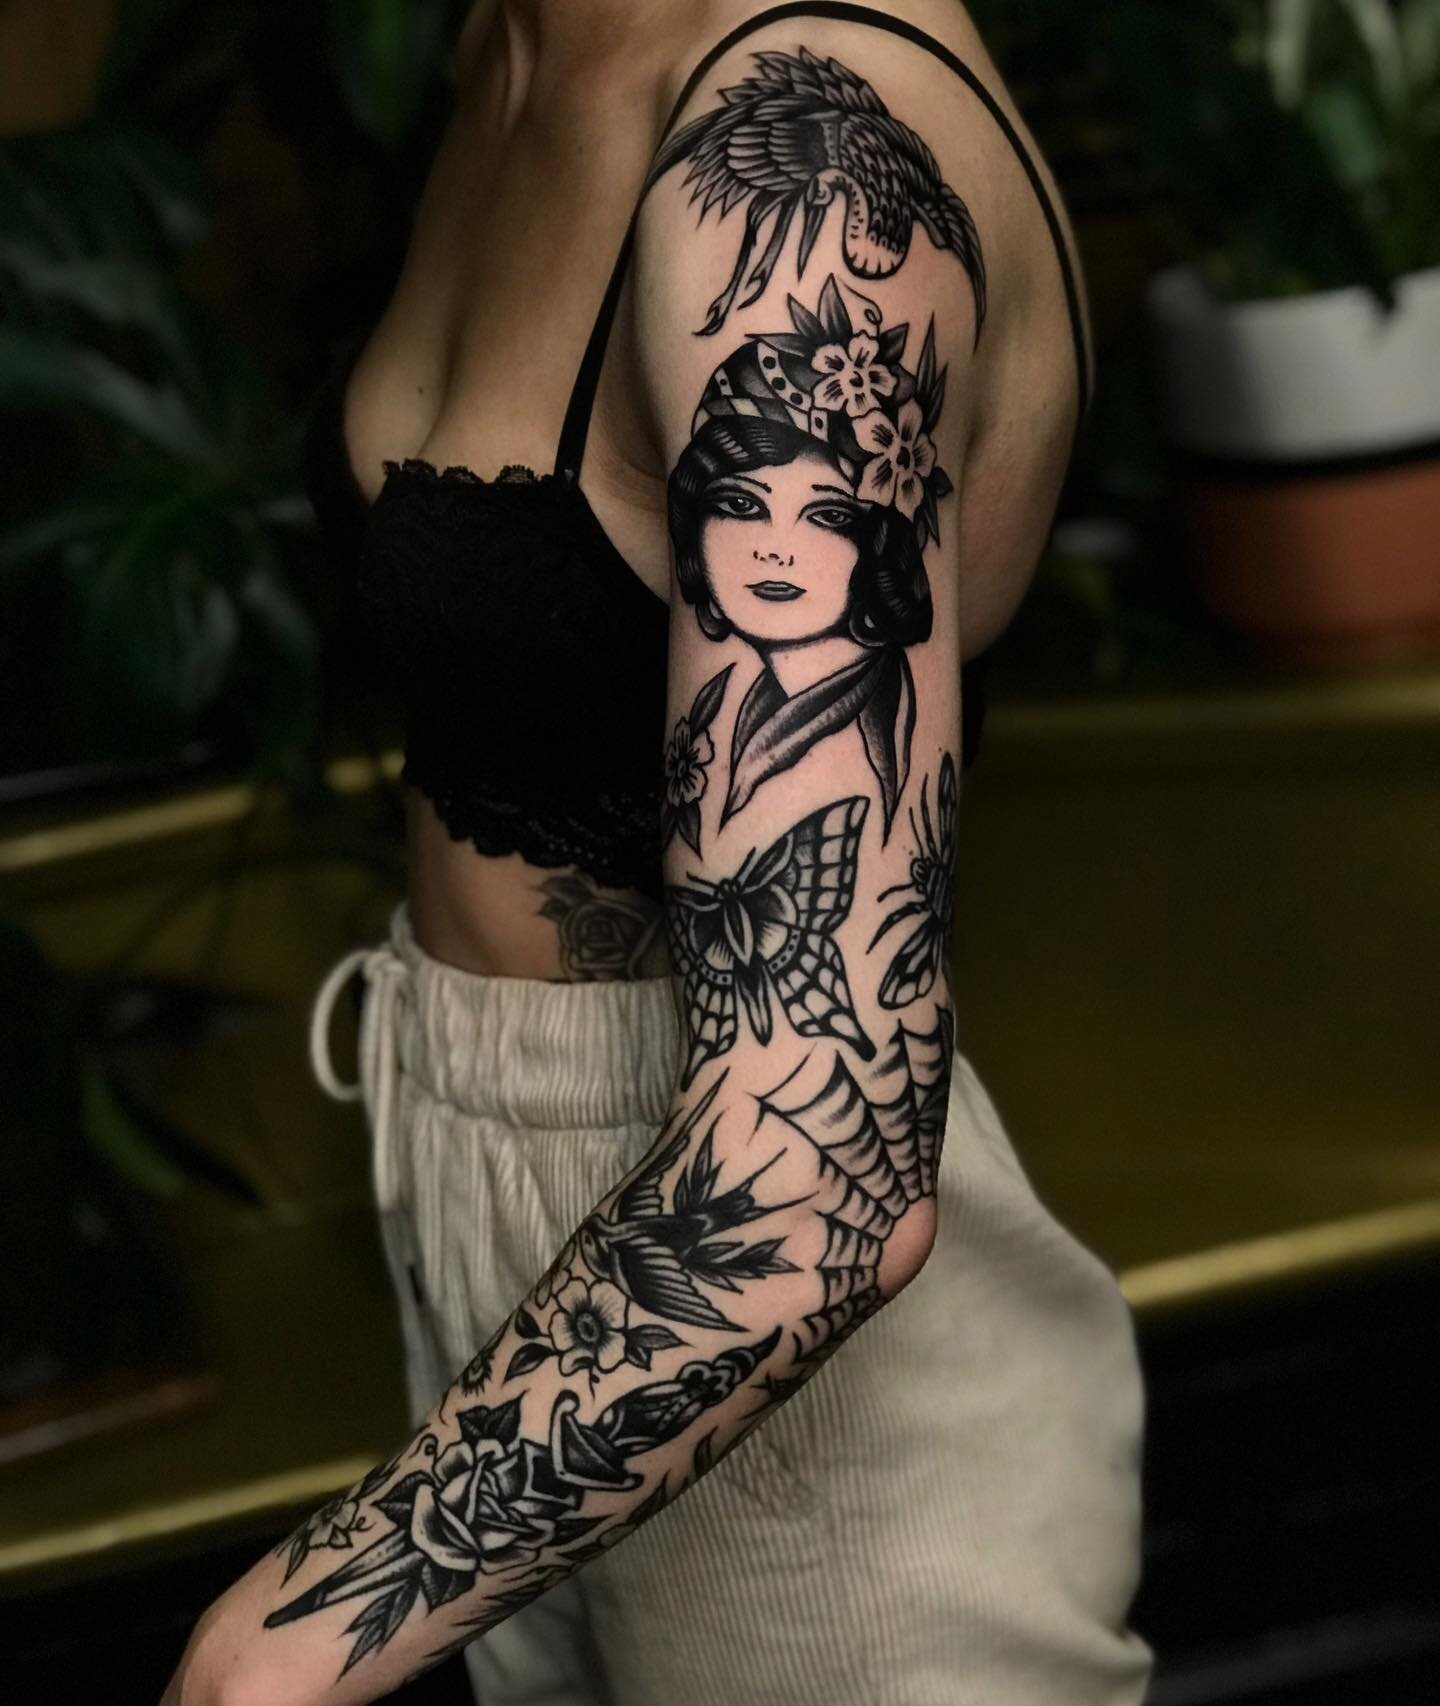 My finished Valkyrie the first part of my Norse themed sleeve done by Sam  at Tattoolicious in Waikiki Oahu HI  rtattoos